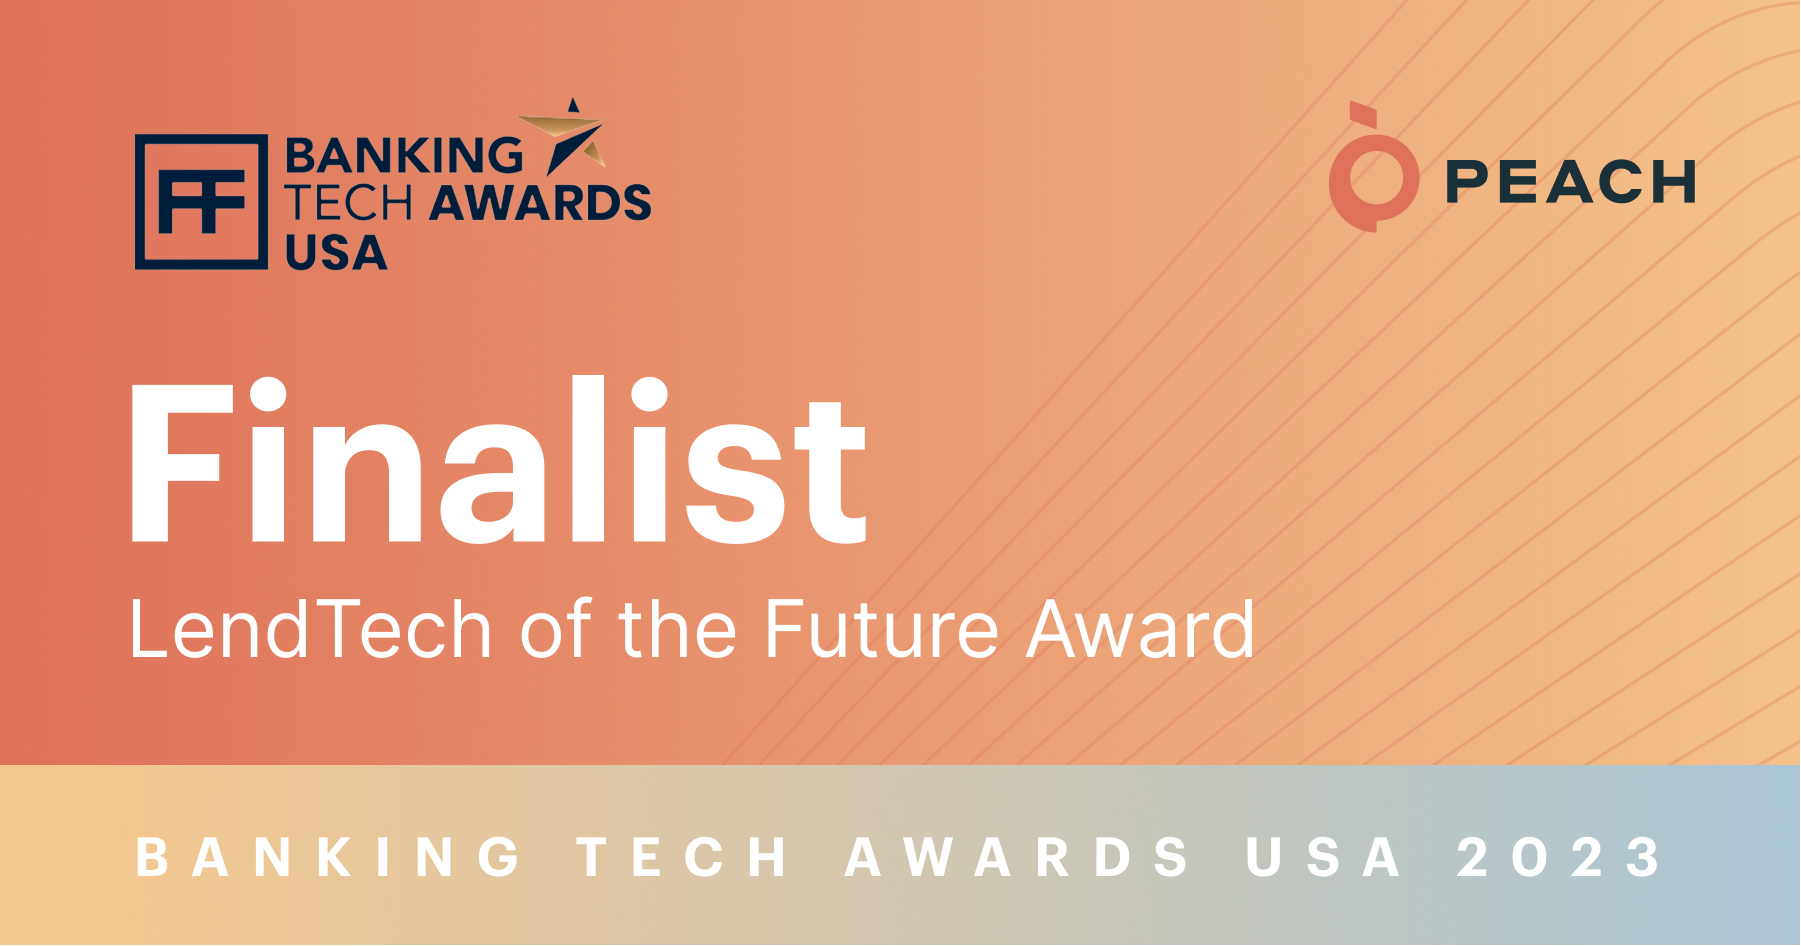 Peach named finalist in Banking Tech Awards USA 2023